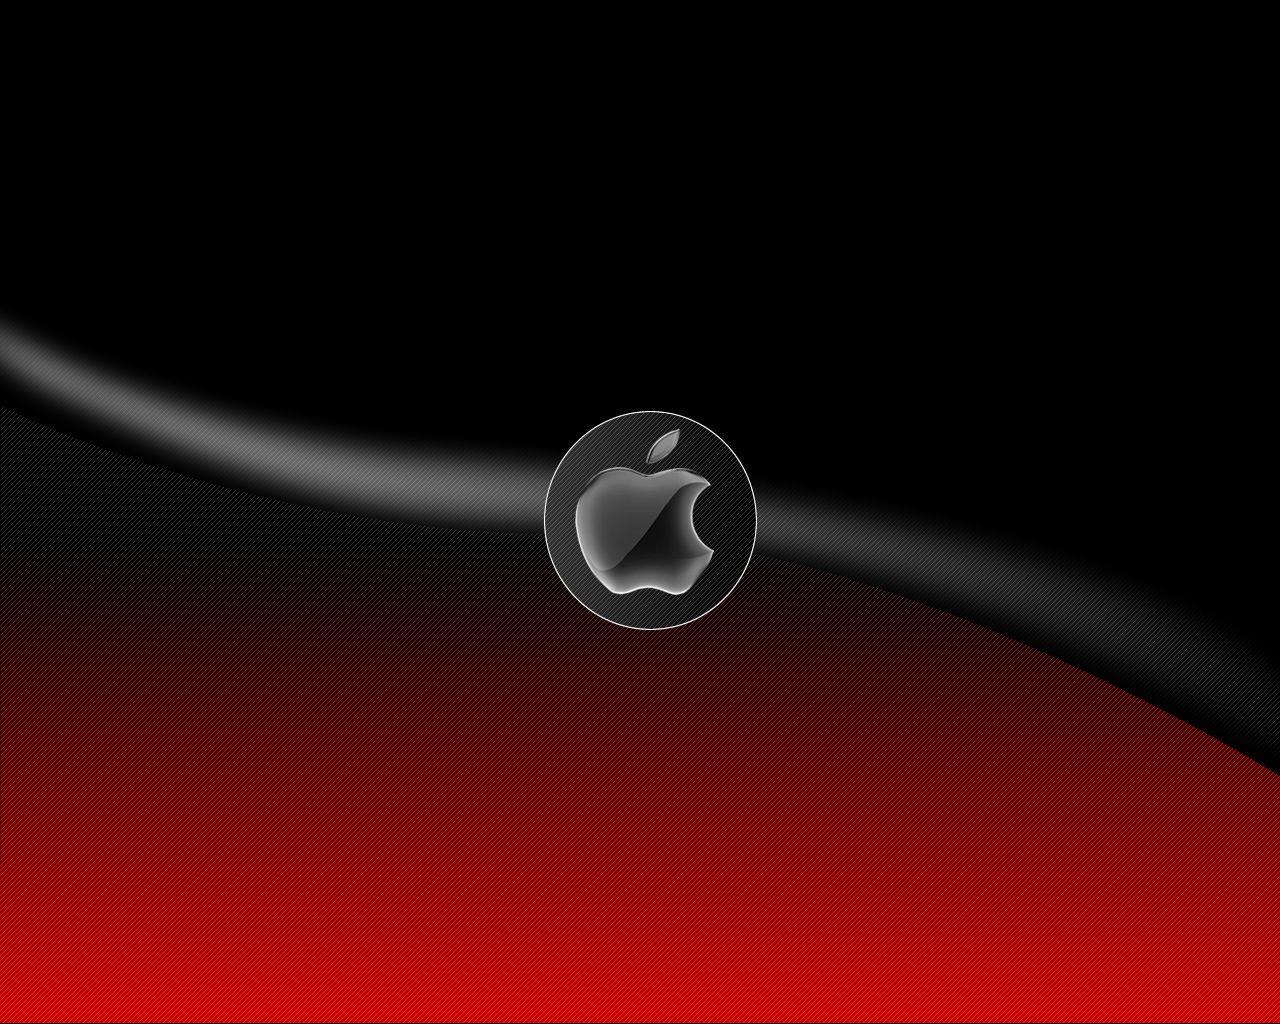 Cool Black and Red Logo - World Wallpaper: cool black and red background